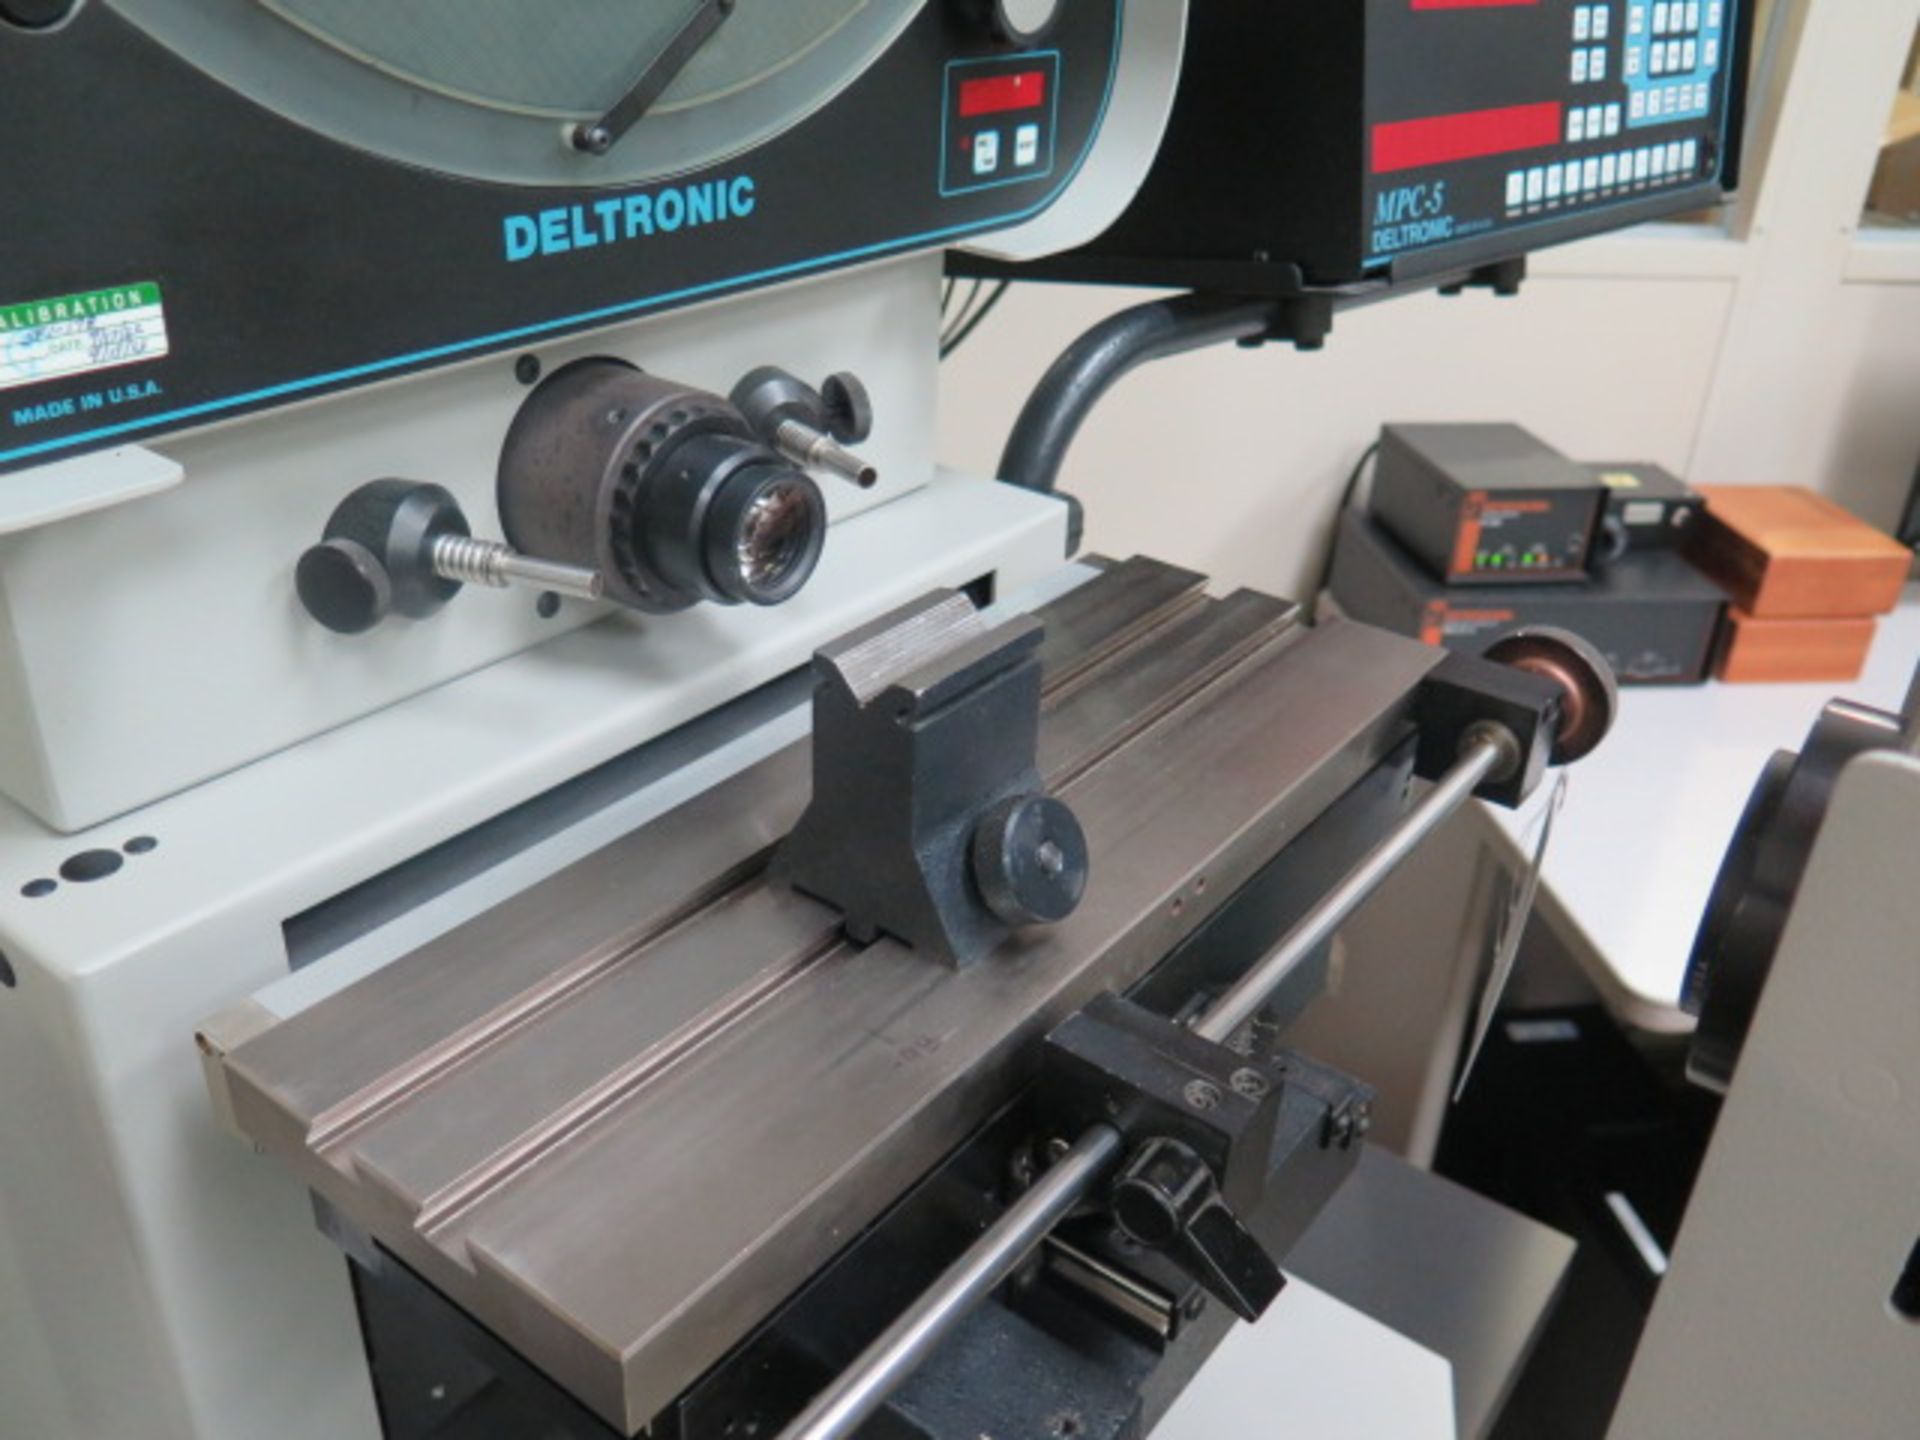 Deltronic DH216-MPC5 15” Optical Comparator s/n 389045807 w/ MPC-5 Programmable DRO, SOLD AS IS - Image 6 of 13